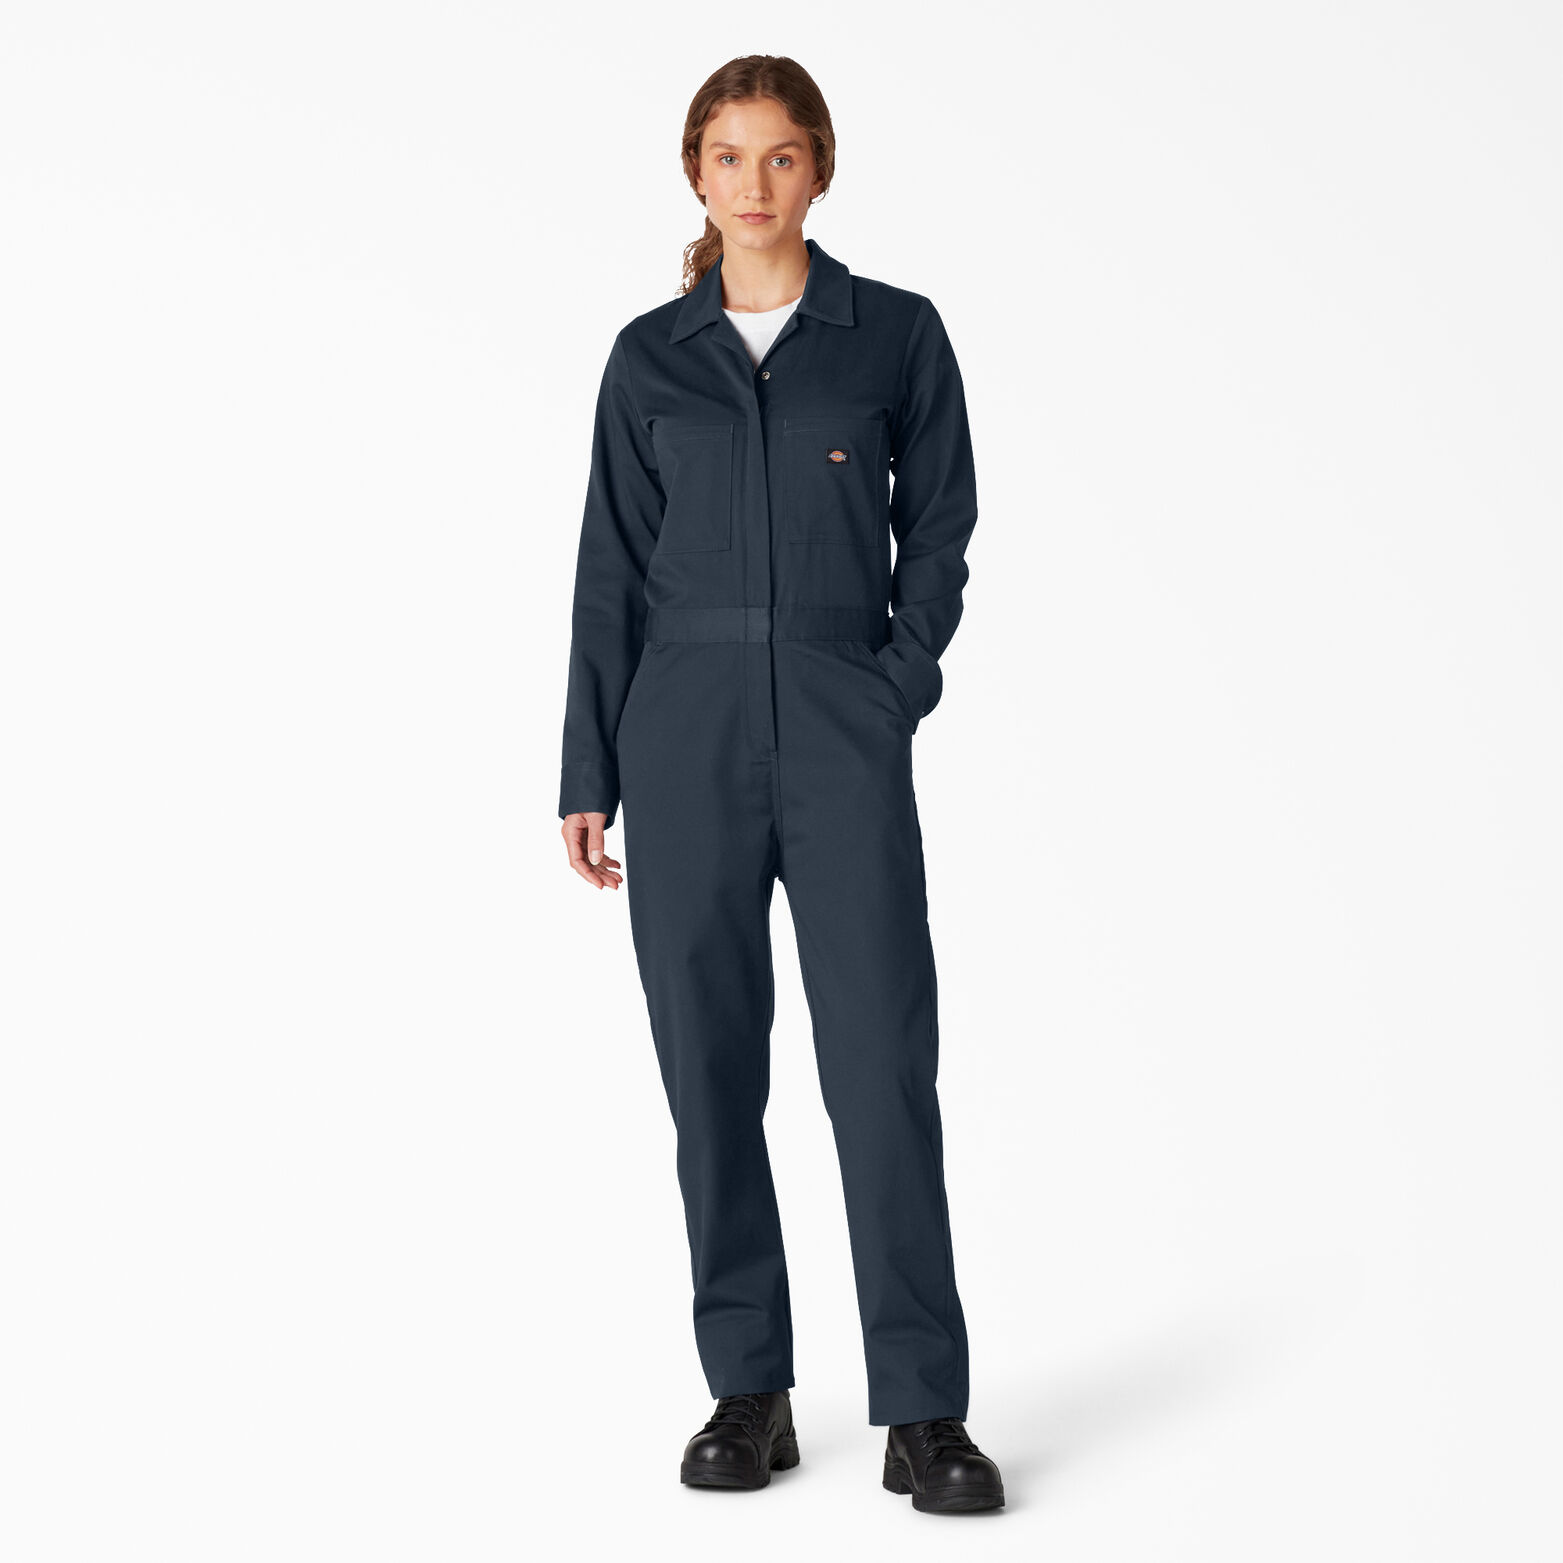 Long Sleeve Coveralls XL Navy Cotton 